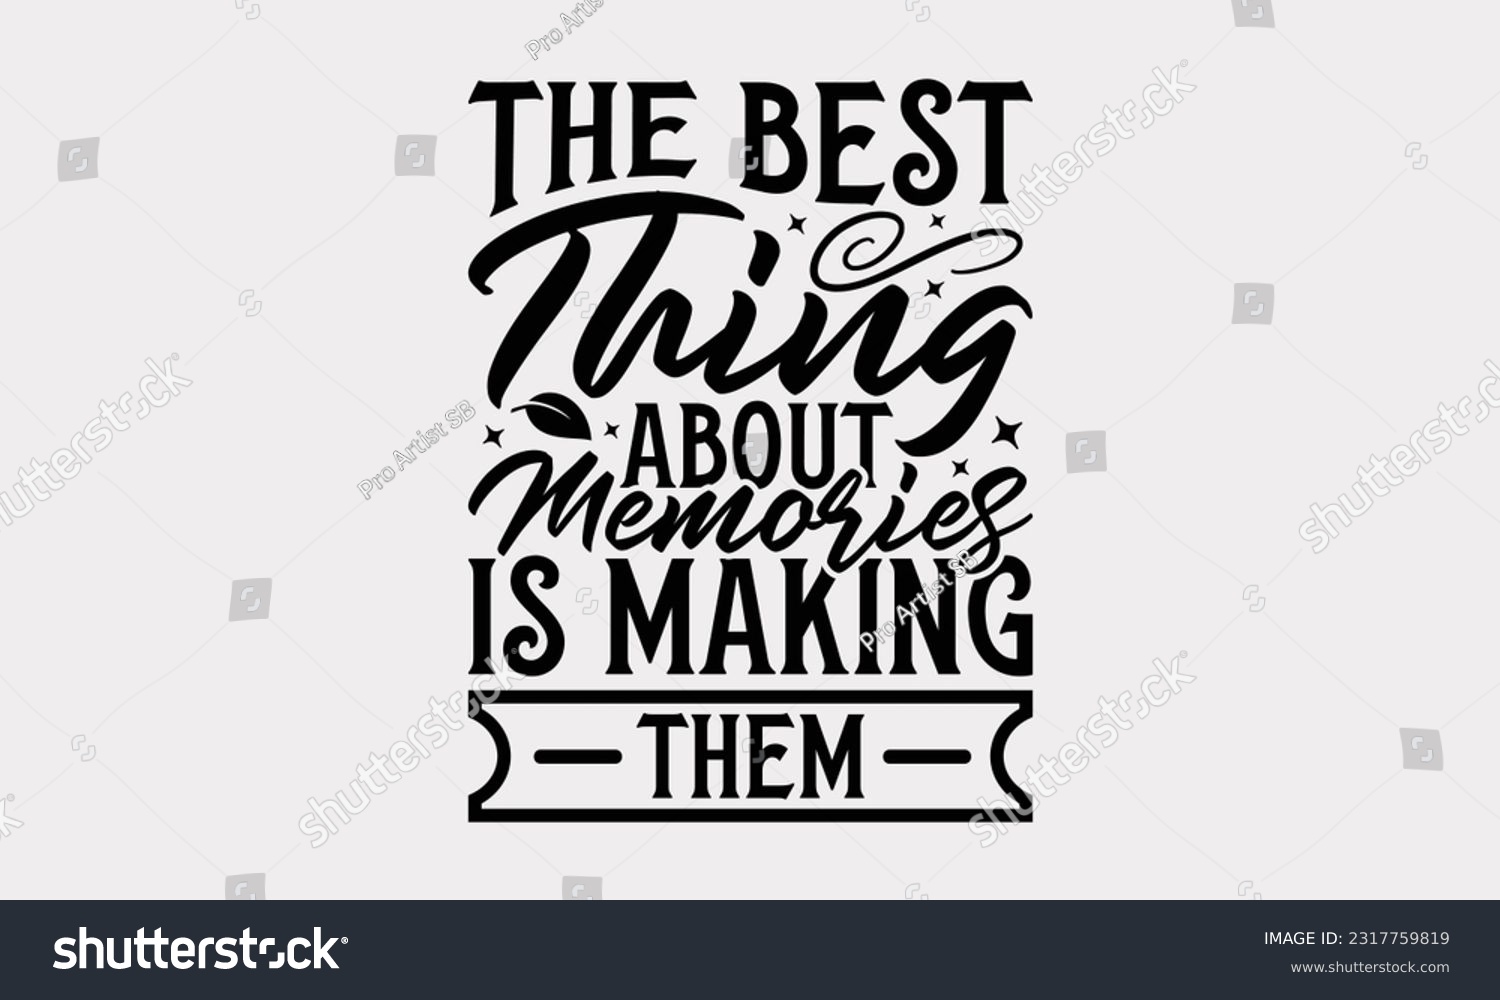 SVG of The Best Thing About Memories Is Making Them - Family SVG Design, Hand Drawn Vintage Illustration With Hand-Lettering And Decoration Elements, EPS 10. svg